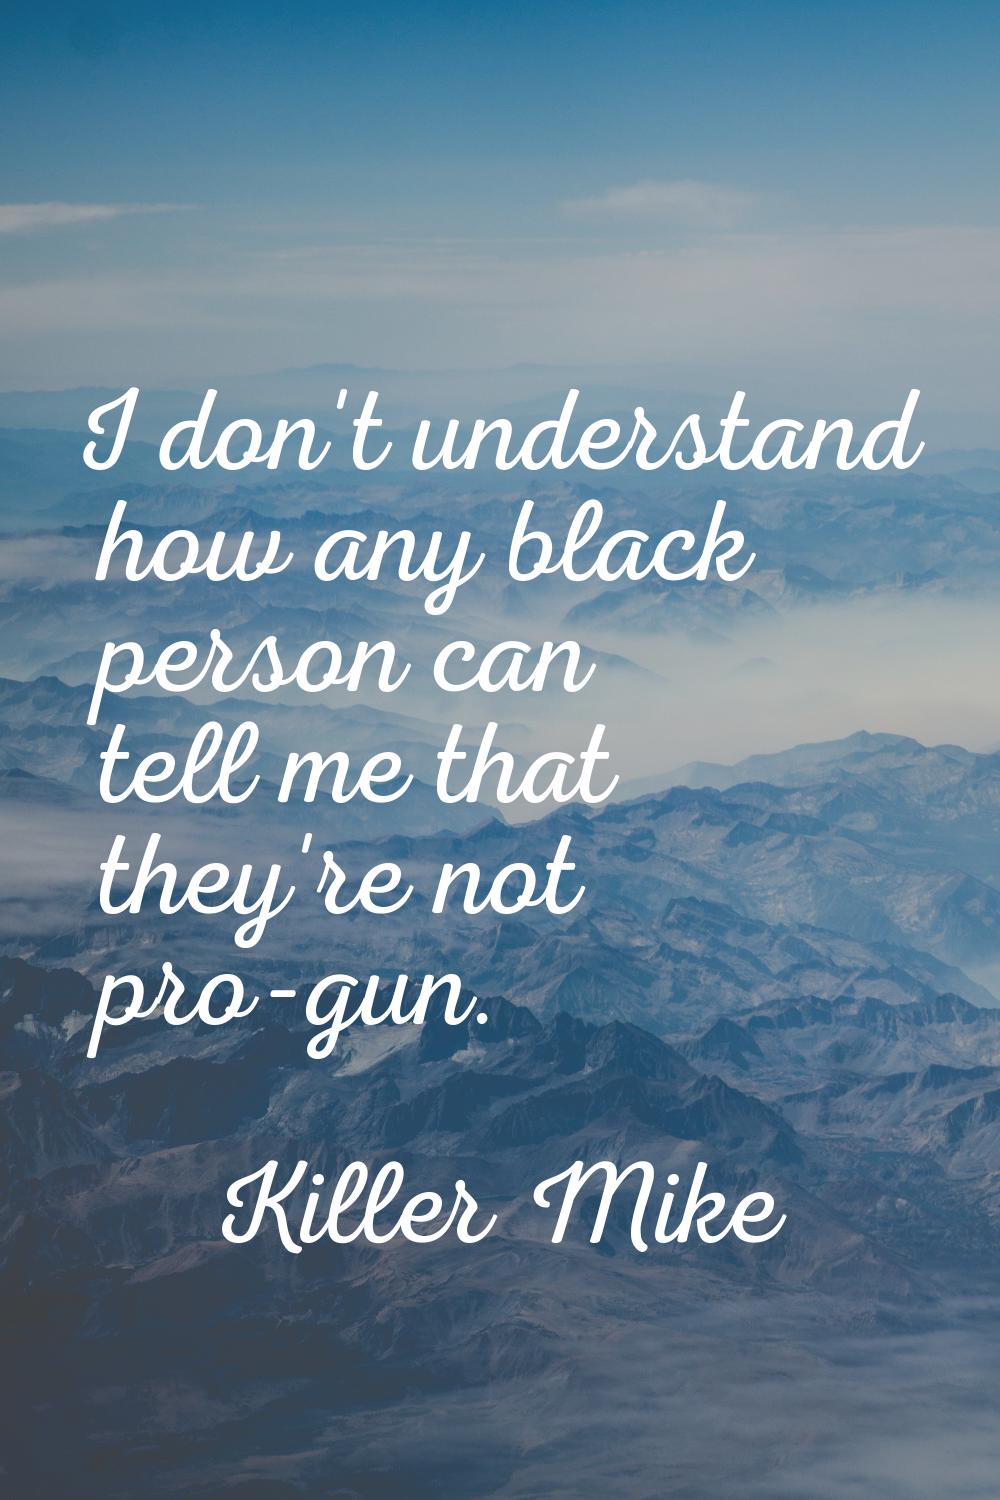 I don't understand how any black person can tell me that they're not pro-gun.